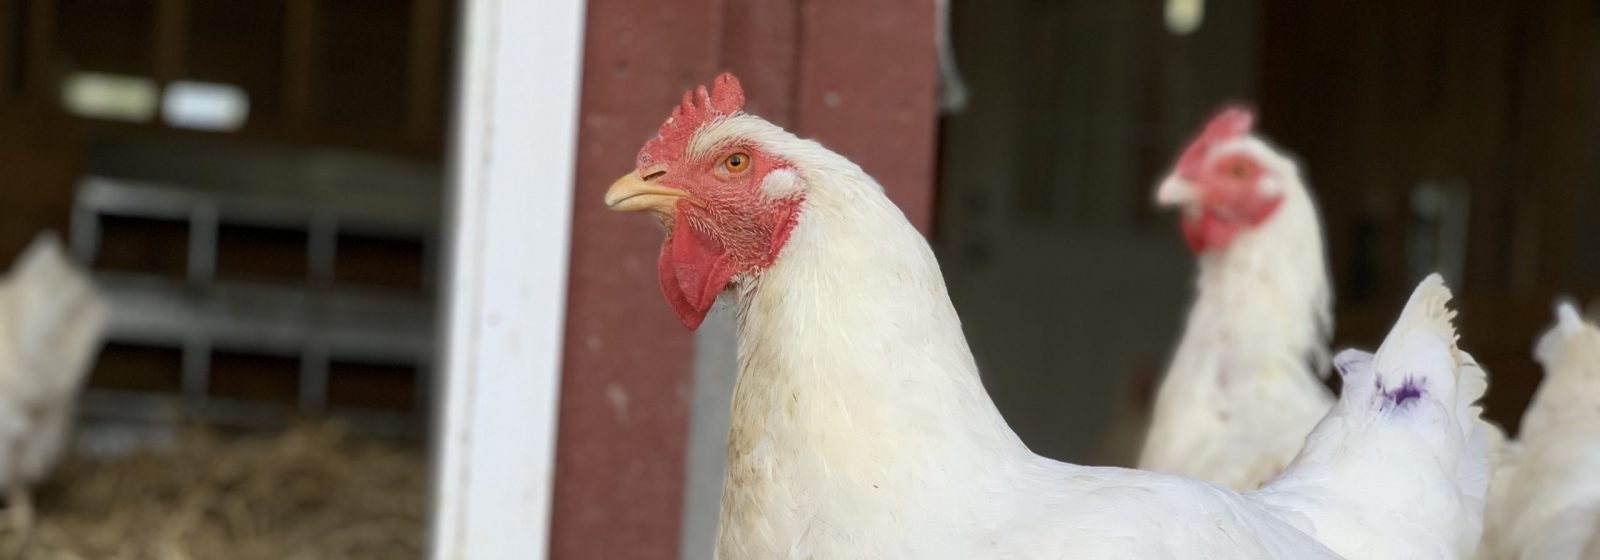 Honeydew hen and others at Farm Sanctuary